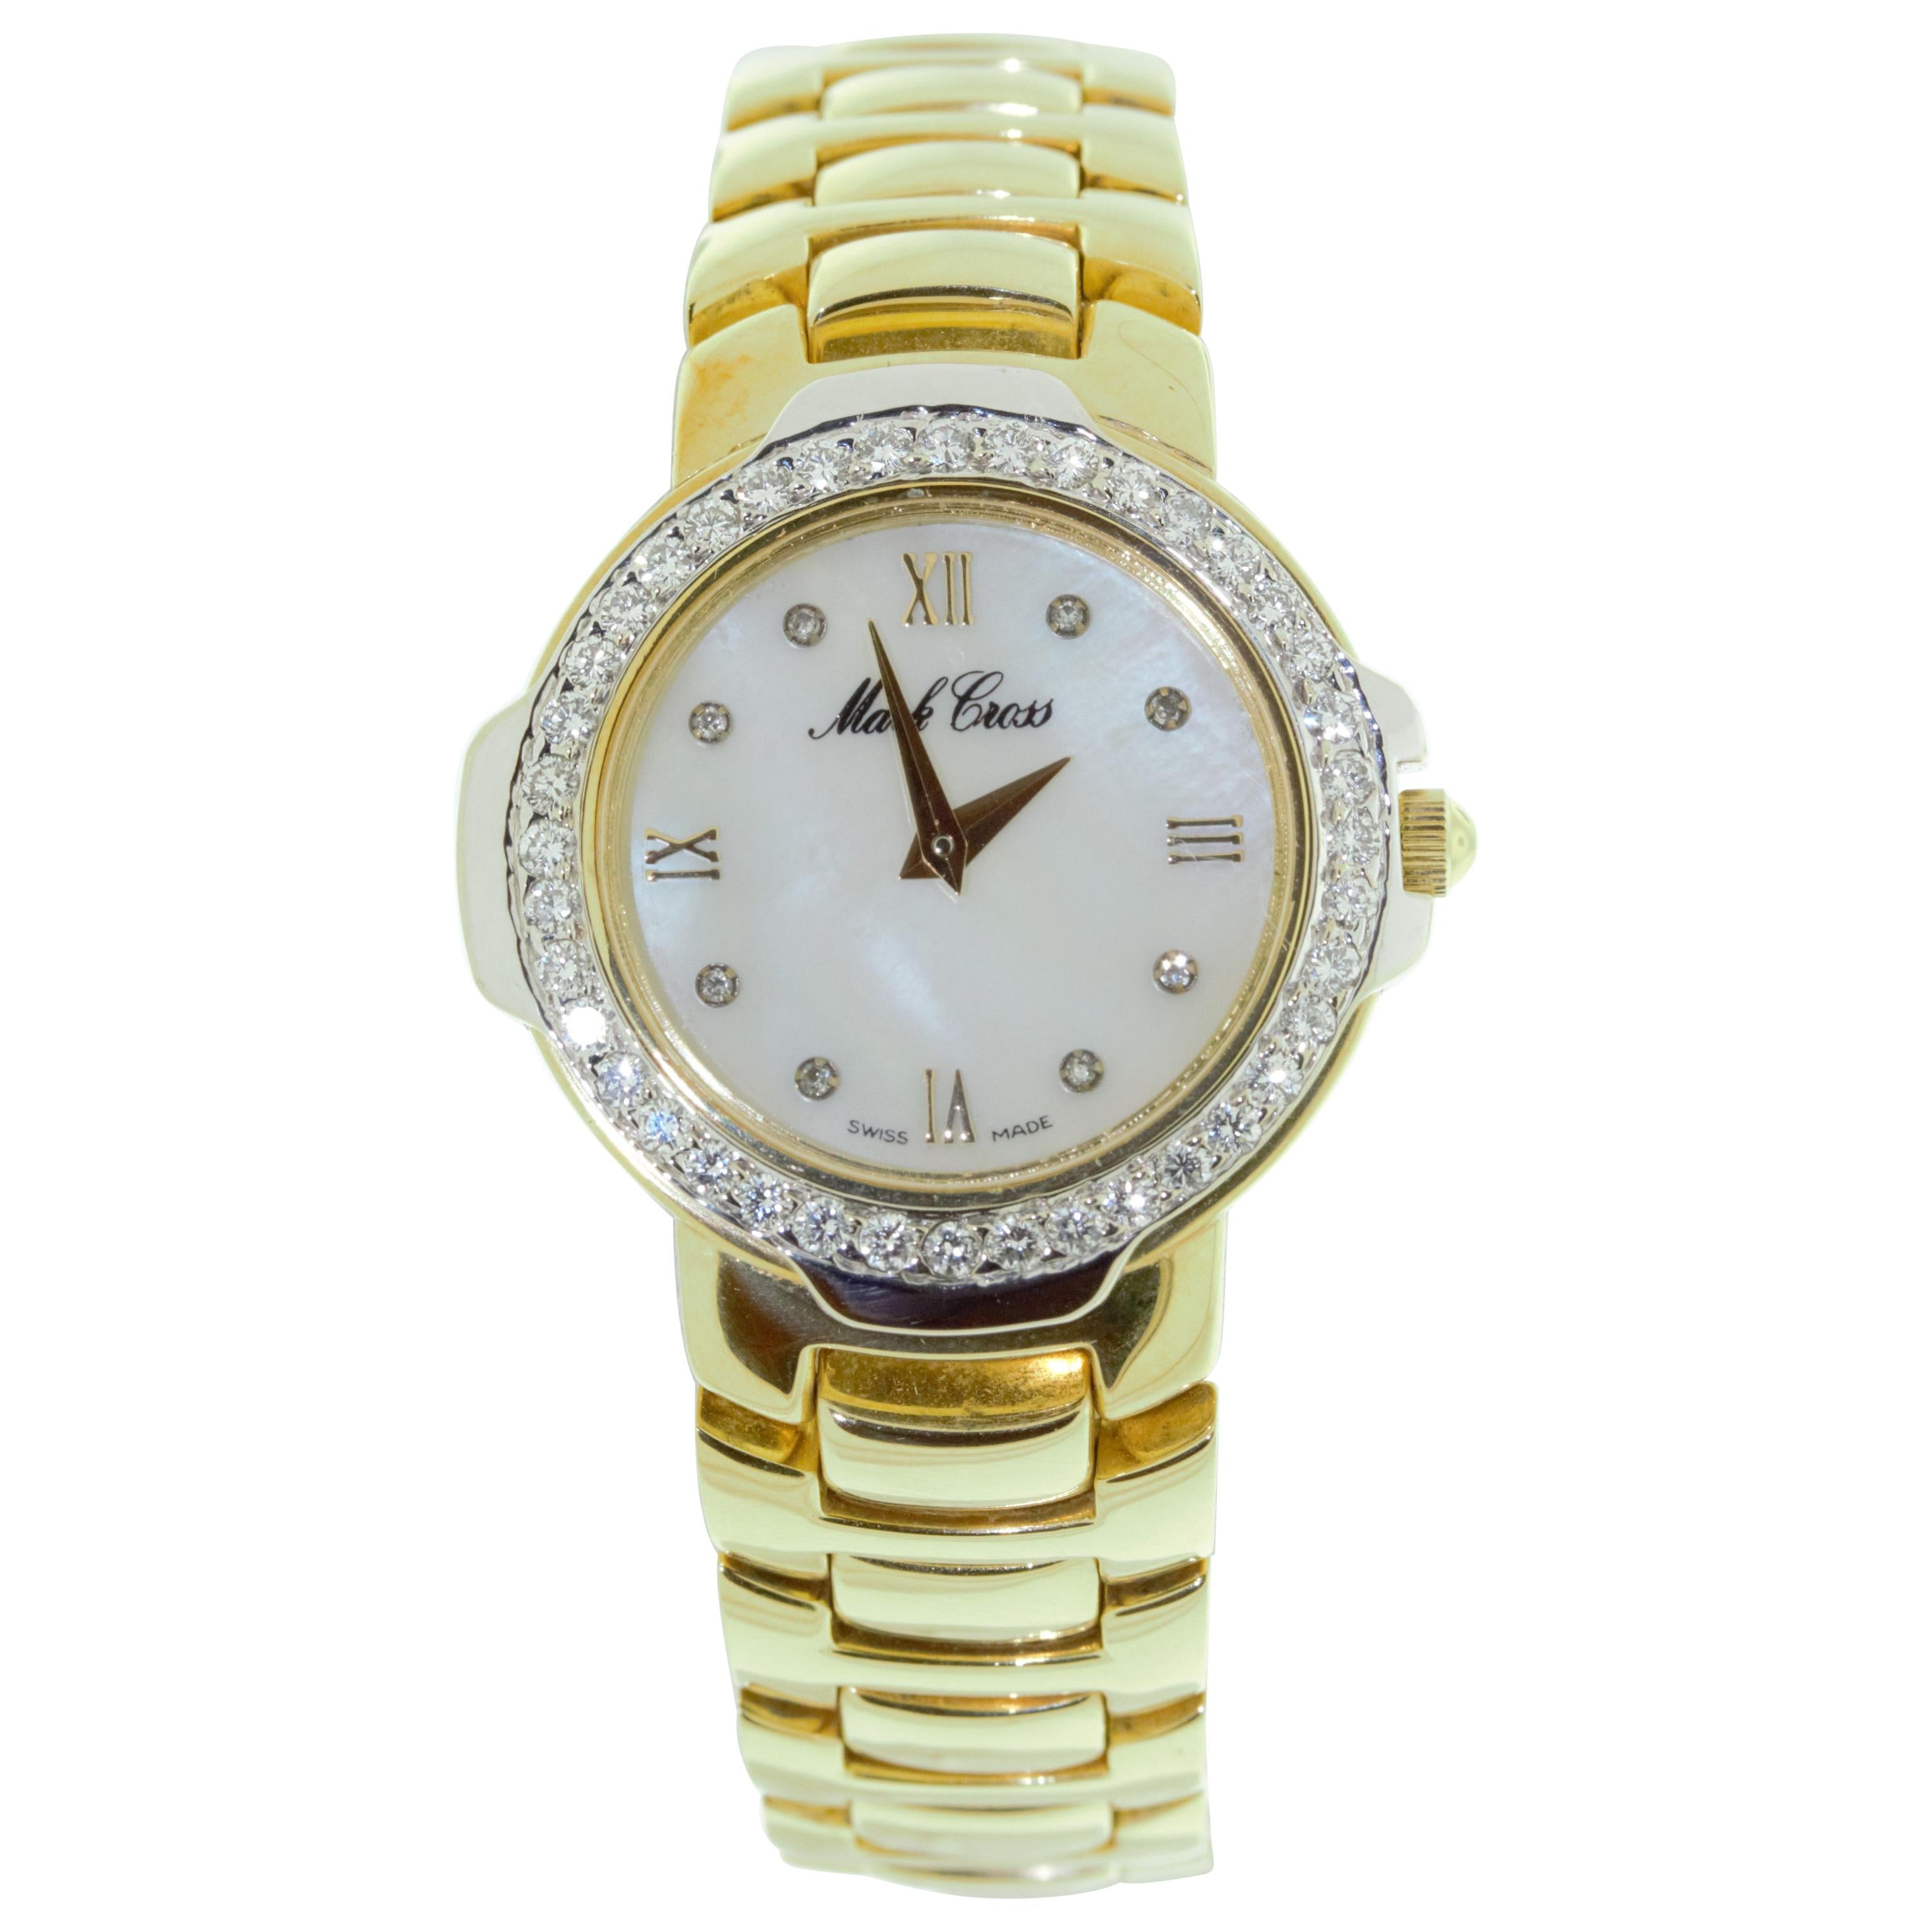 Mark Cross Gold Watch with Pearl Dial